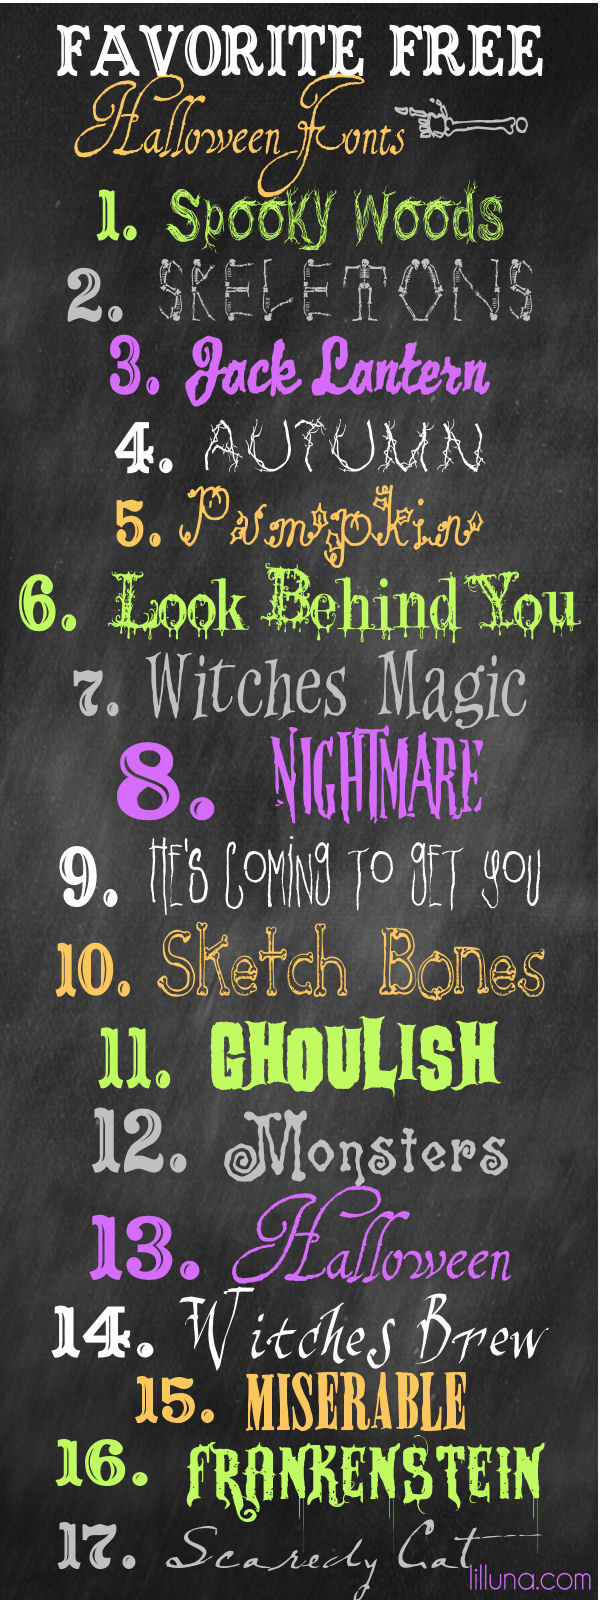 Favorite Free Halloween Fonts on { lilluna.com } So many fun fonts to use in your own creations.